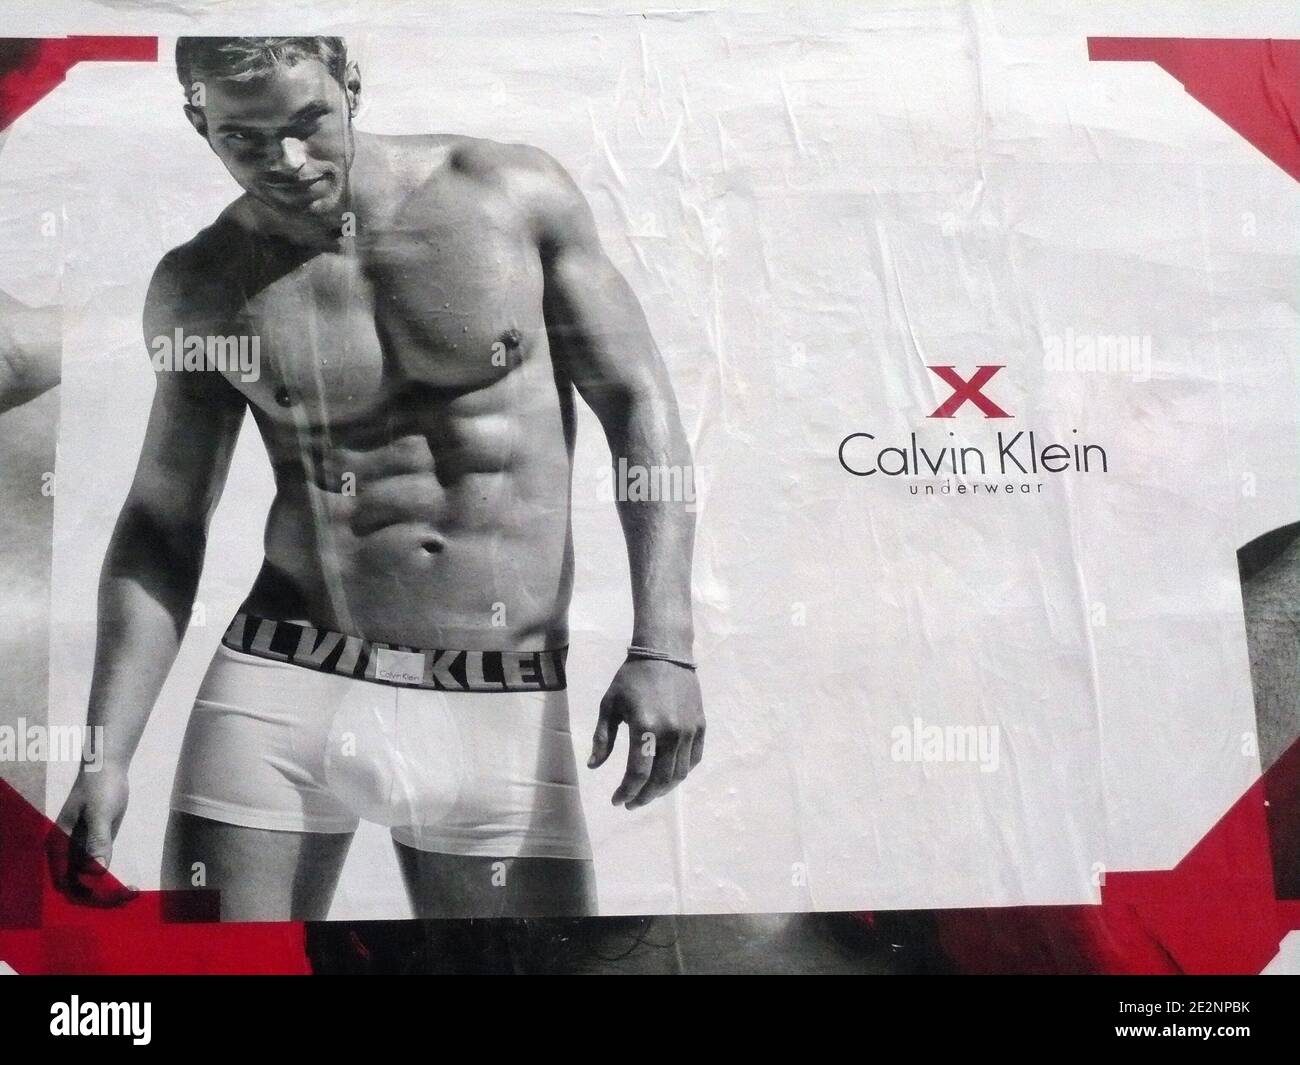 Spanish tennis player Fernando Verdasco and  actor Kellan Lutz are seen  in an advertising campaign for Calvin Klein underwears in New York, NY on  March 4, 2010. Photo by Charles Guerin/ (